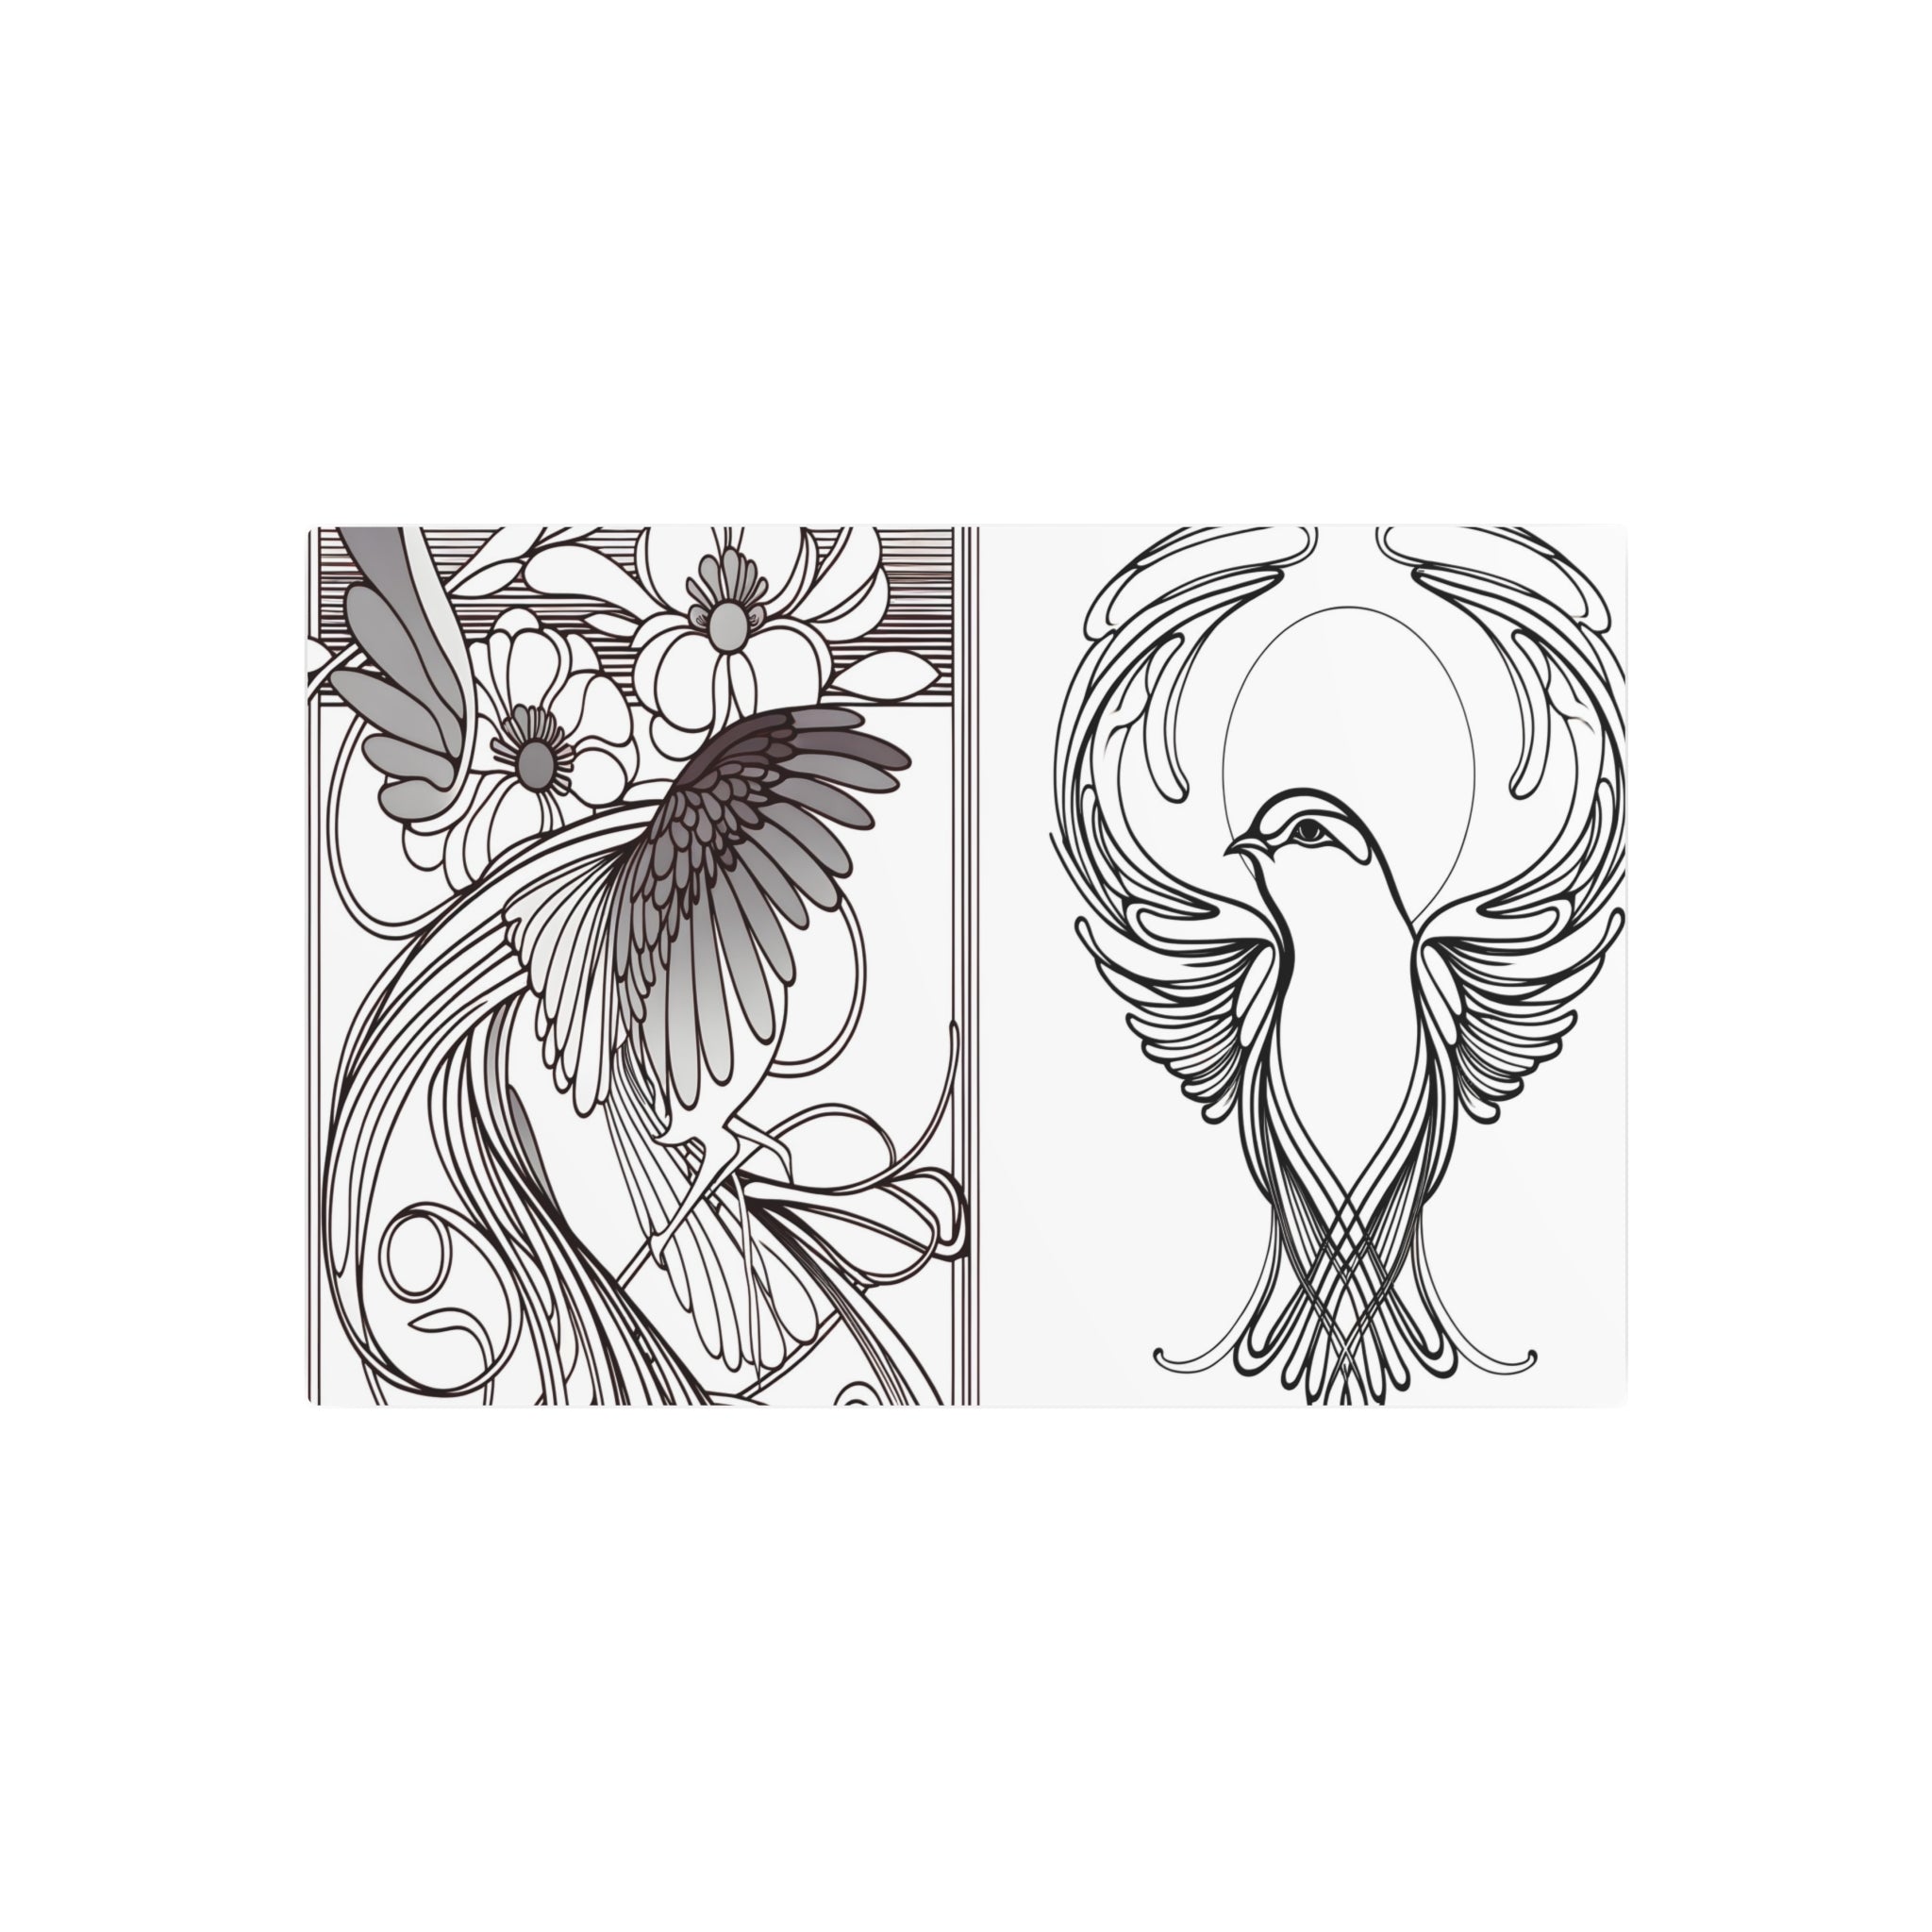 Metal Poster Art | "Art Nouveau Western Art Style - Intricate Bird and Floral Design with Organic Lines and Natural Patterns" - Metal Poster Art 30″ x 20″ (Horizontal) 0.12''